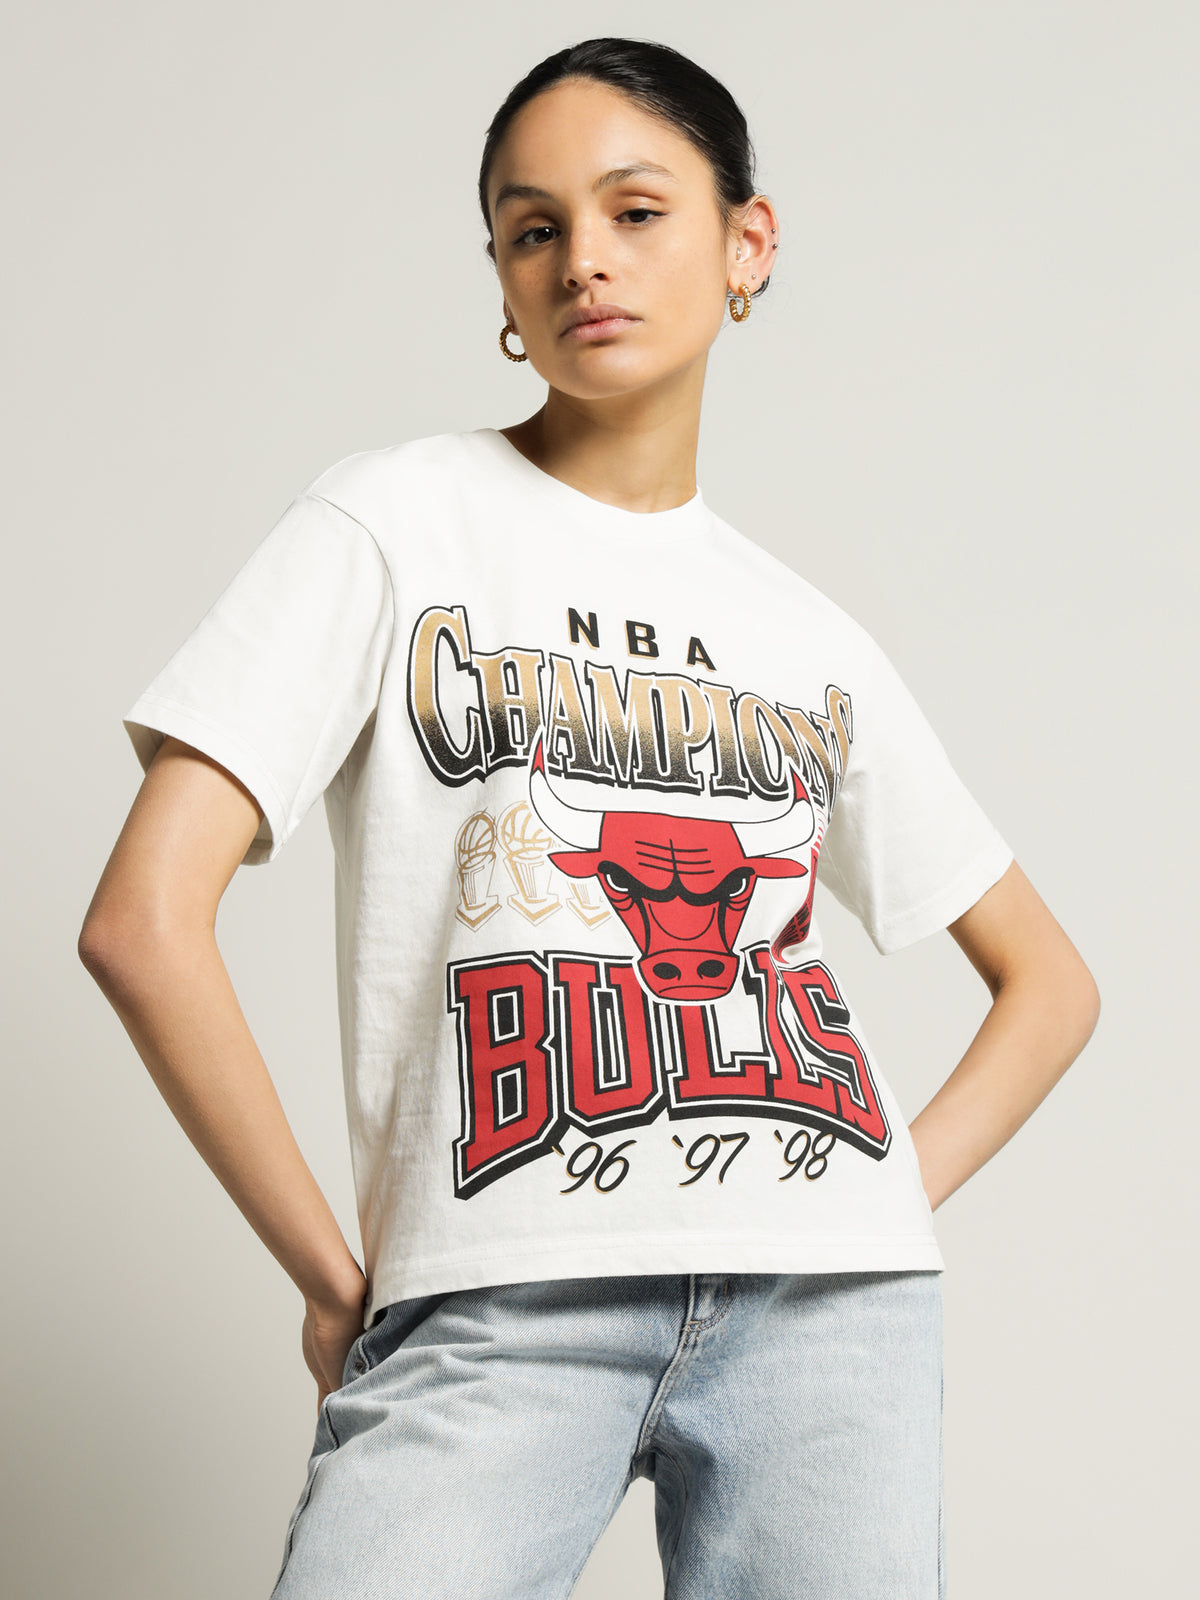 NBA Champs Chicago Bulls T-Shirt in Vintage White